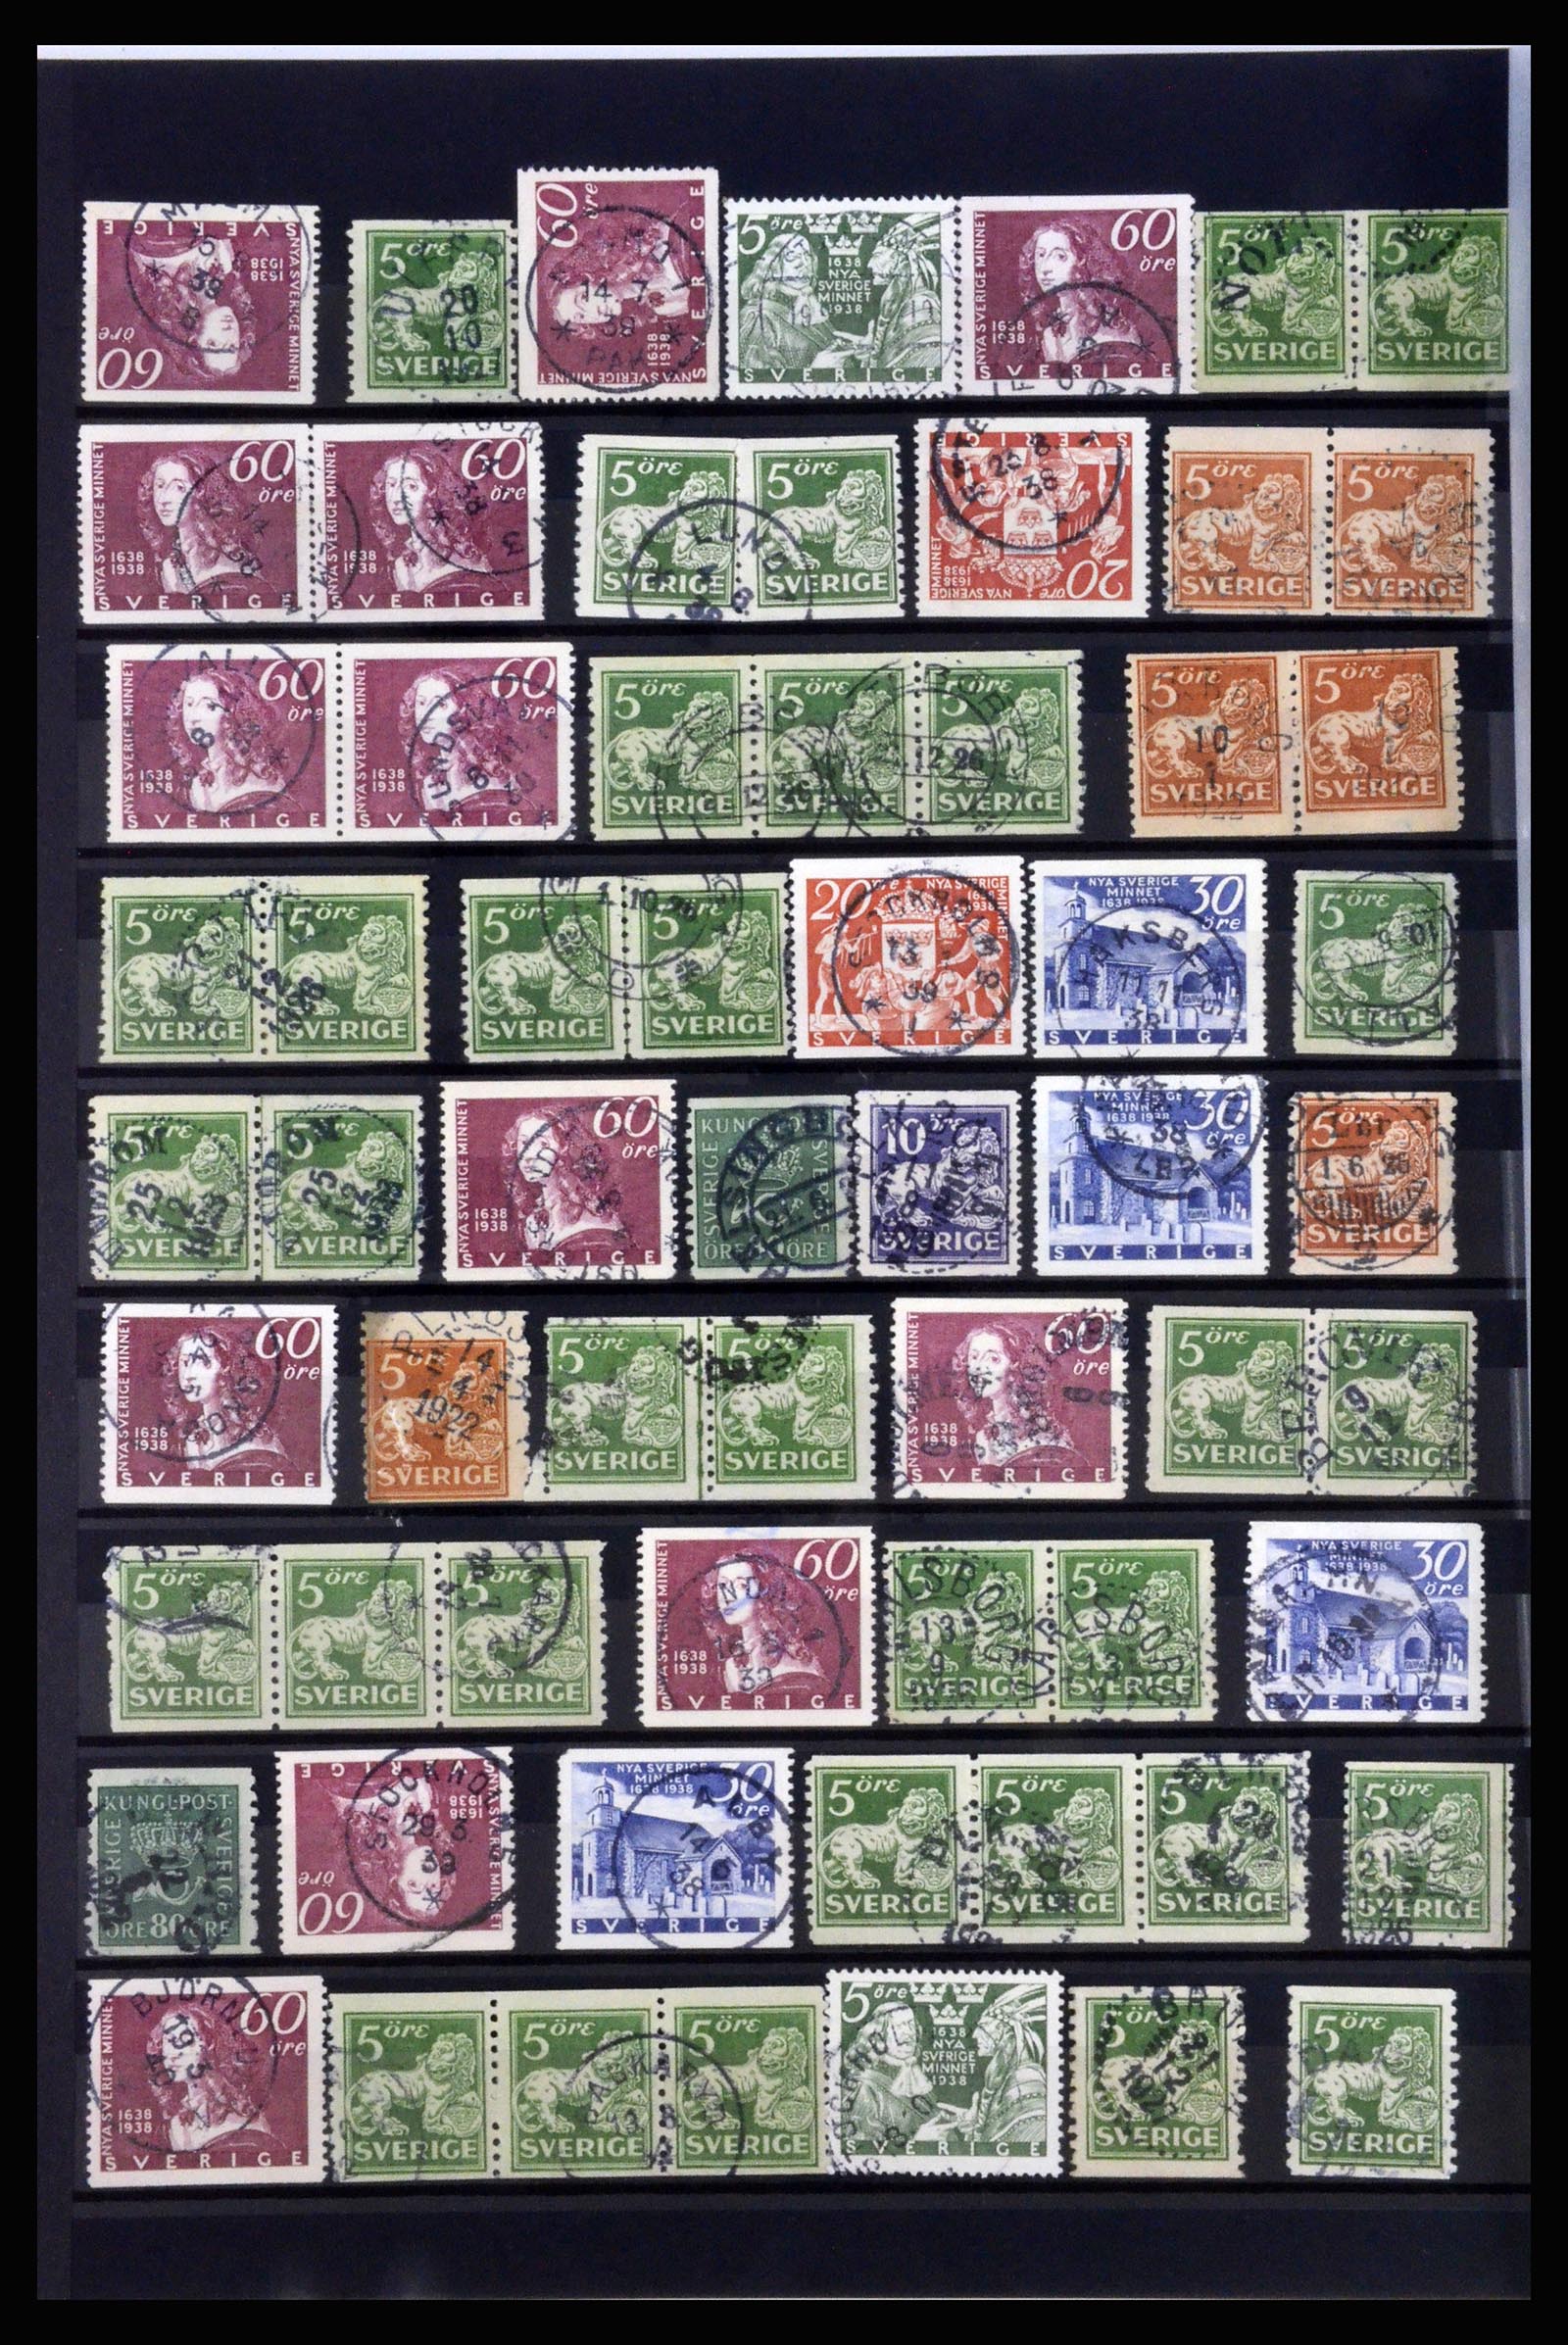 36316 032 - Stamp collection 36316 Sweden cancellations 1920-1938.